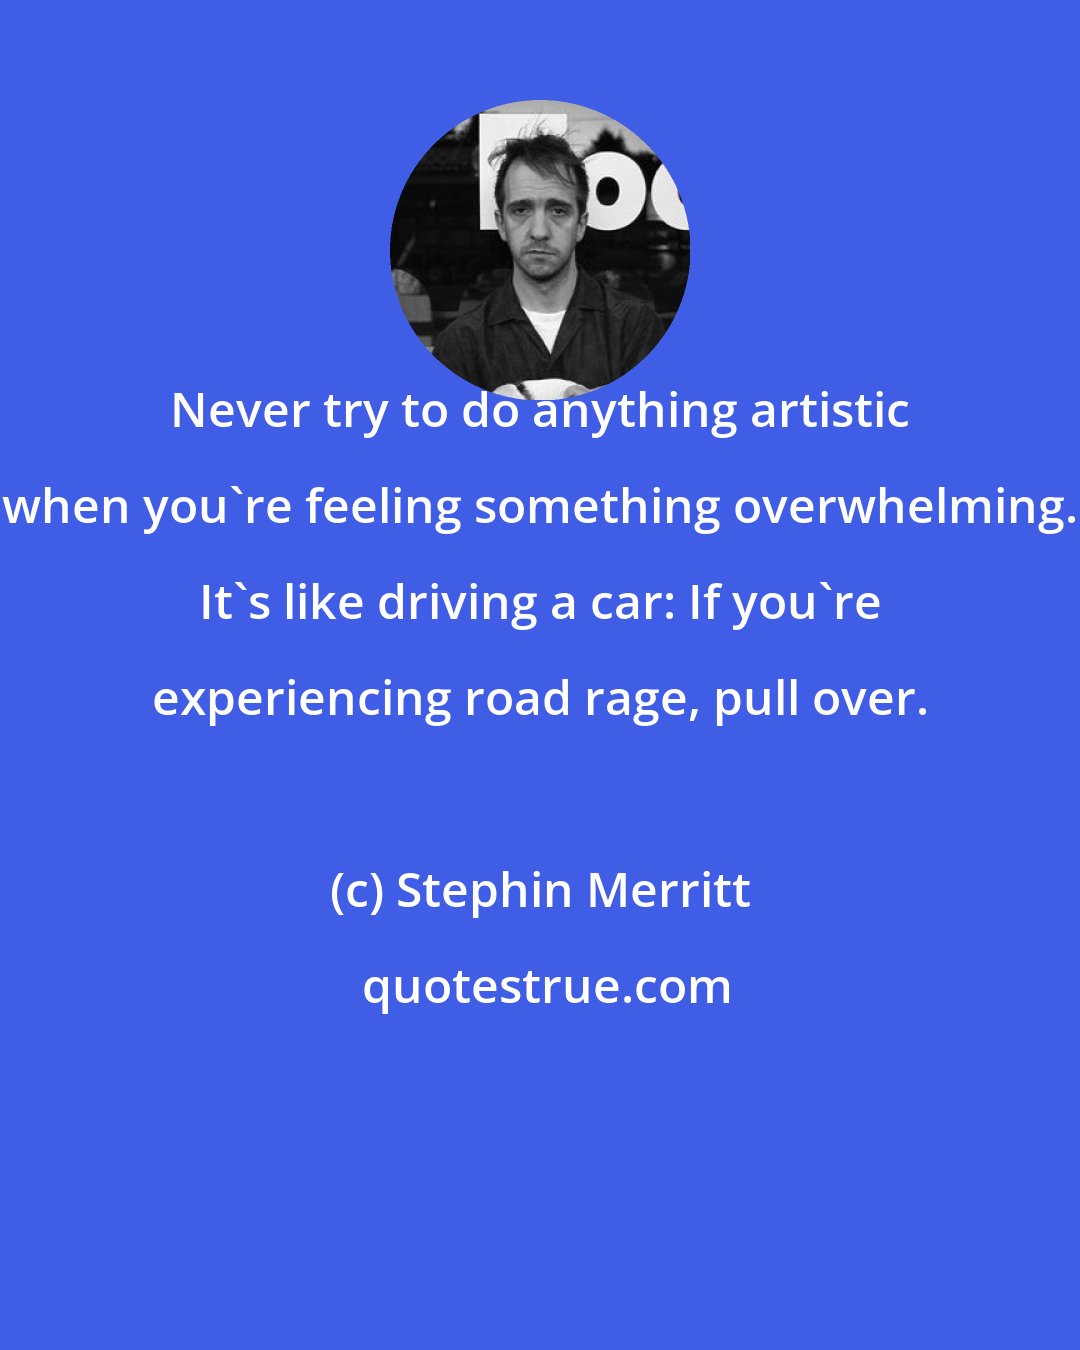 Stephin Merritt: Never try to do anything artistic when you're feeling something overwhelming. It's like driving a car: If you're experiencing road rage, pull over.